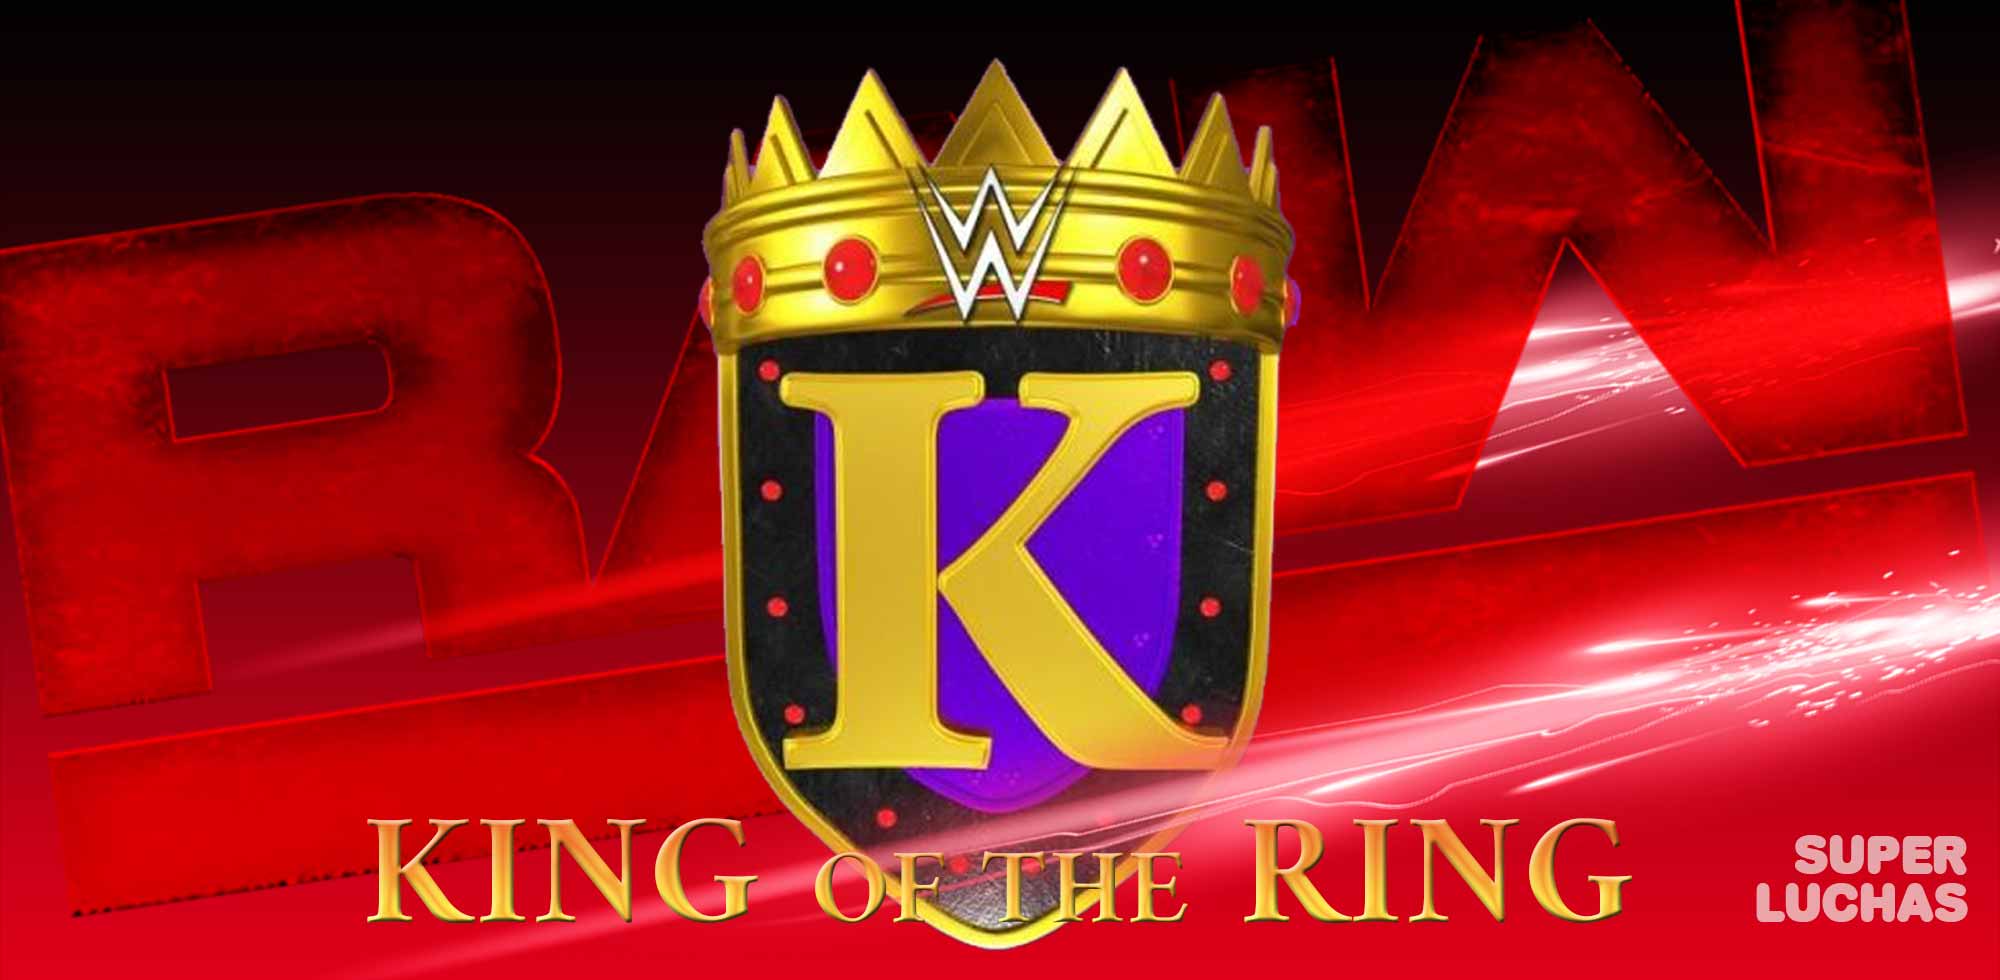 WWE king of the ring 2019 Raw